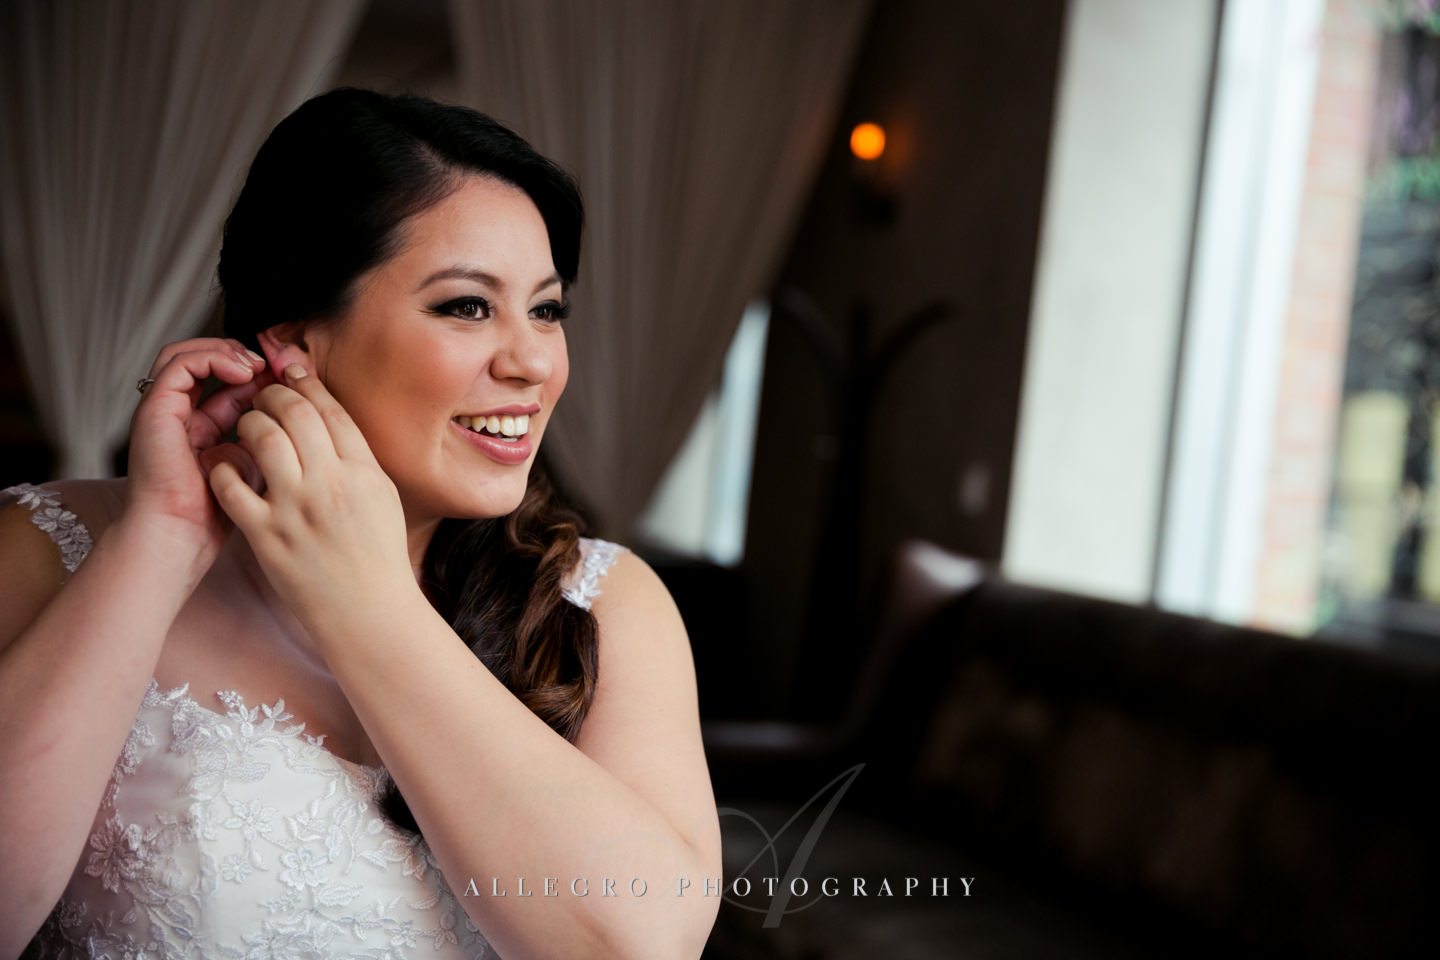 bride puts on wedding jewelry earrings -photo by allegro photography